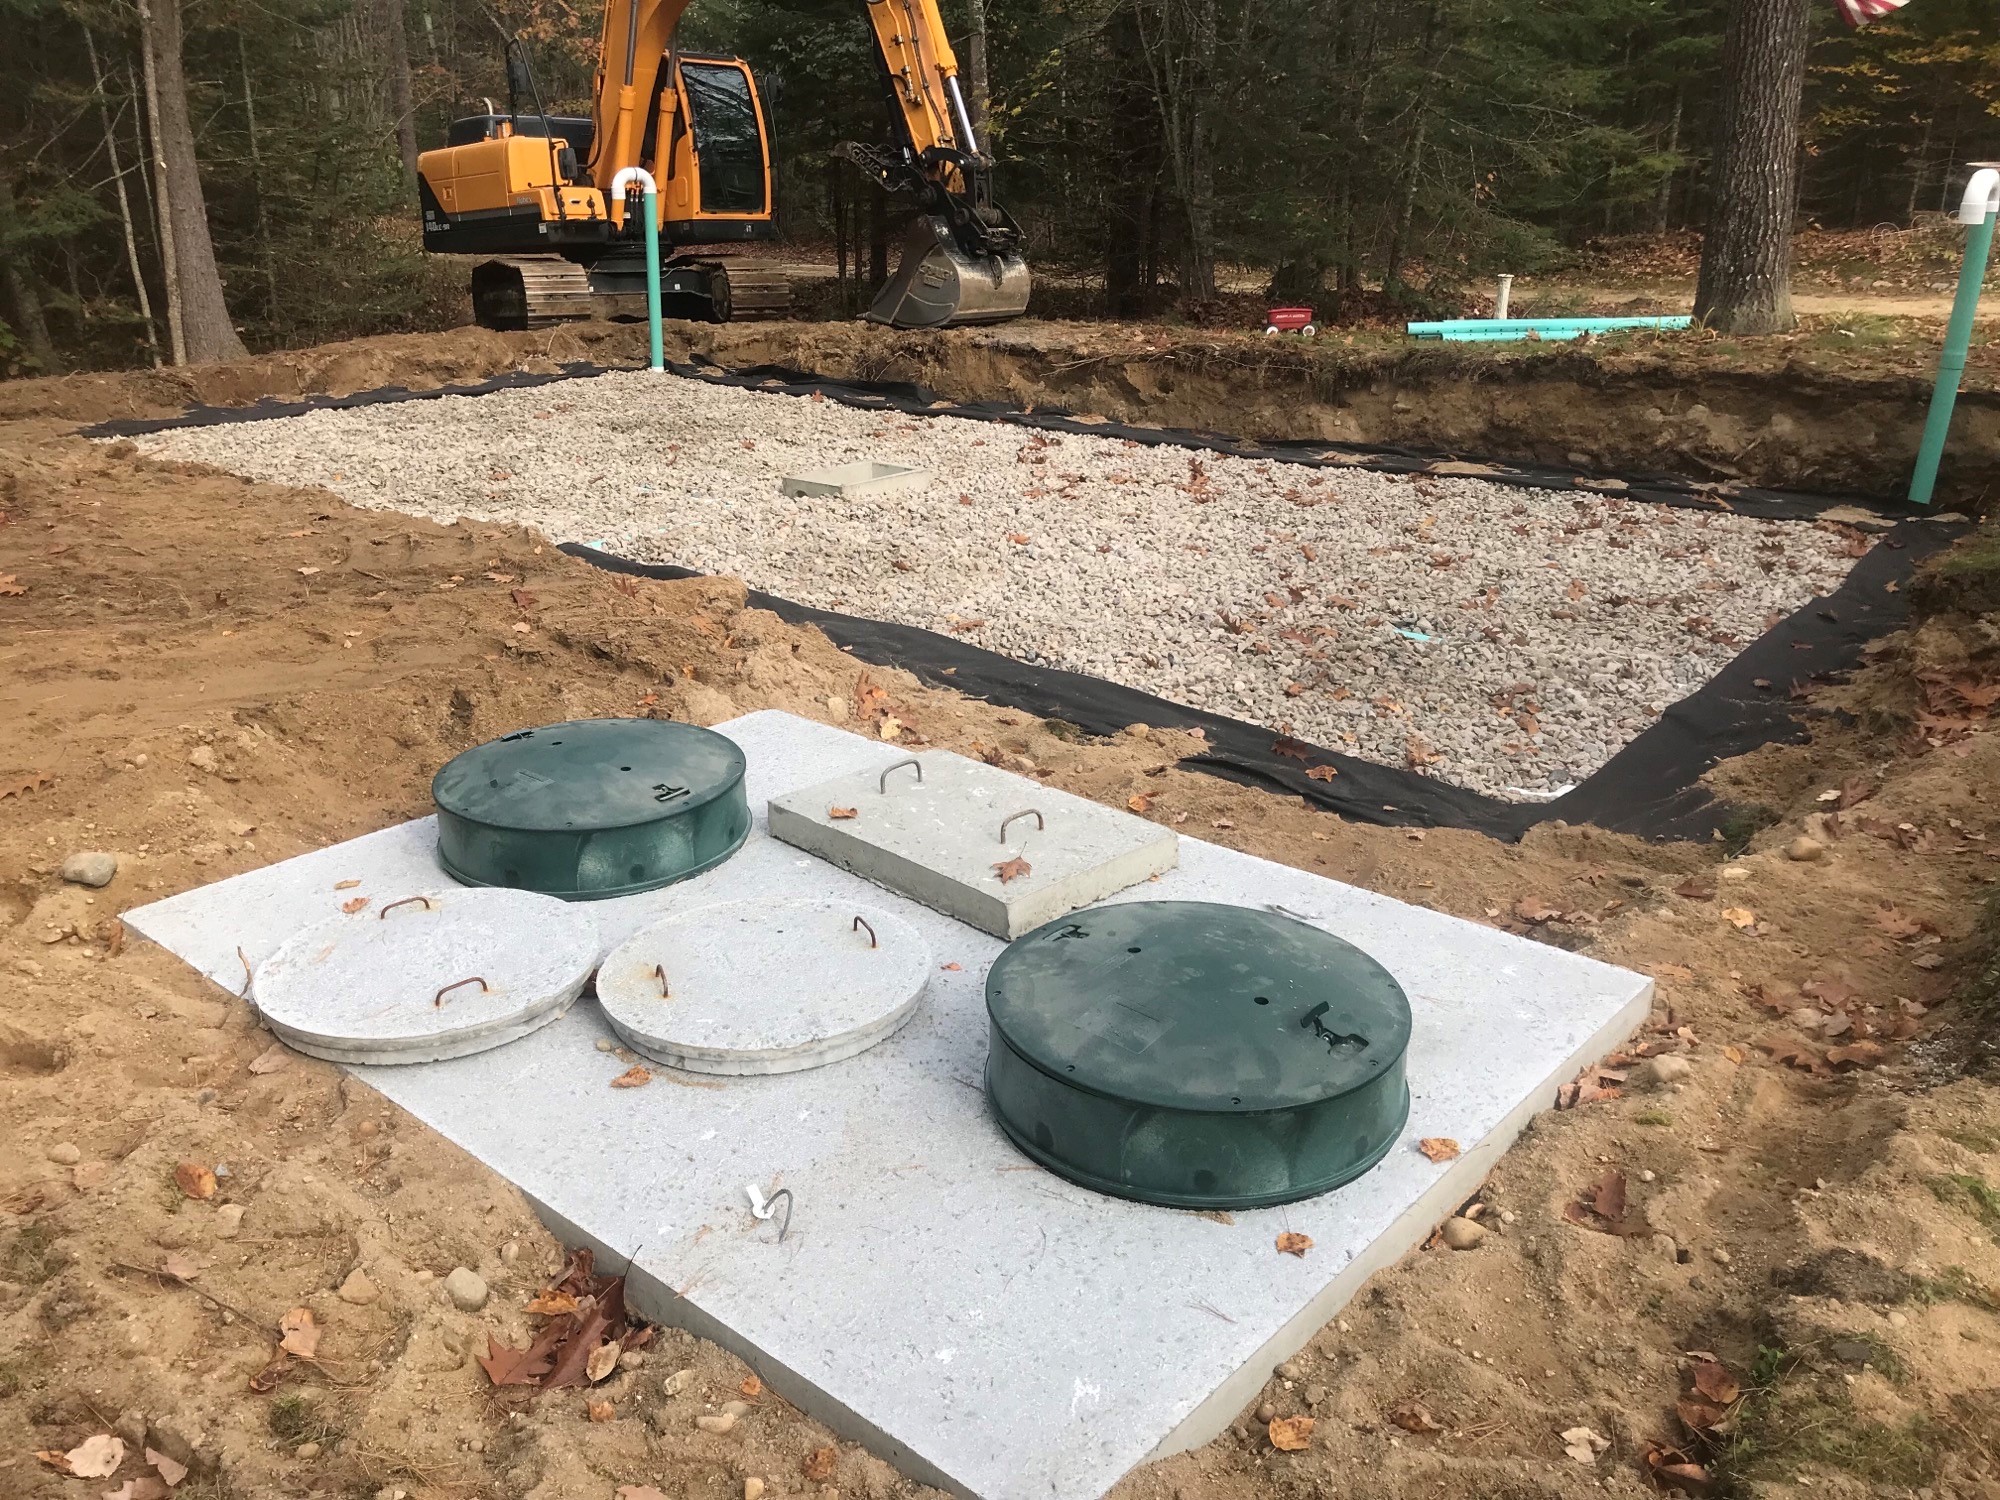 an image showing the installation of septic system pipes